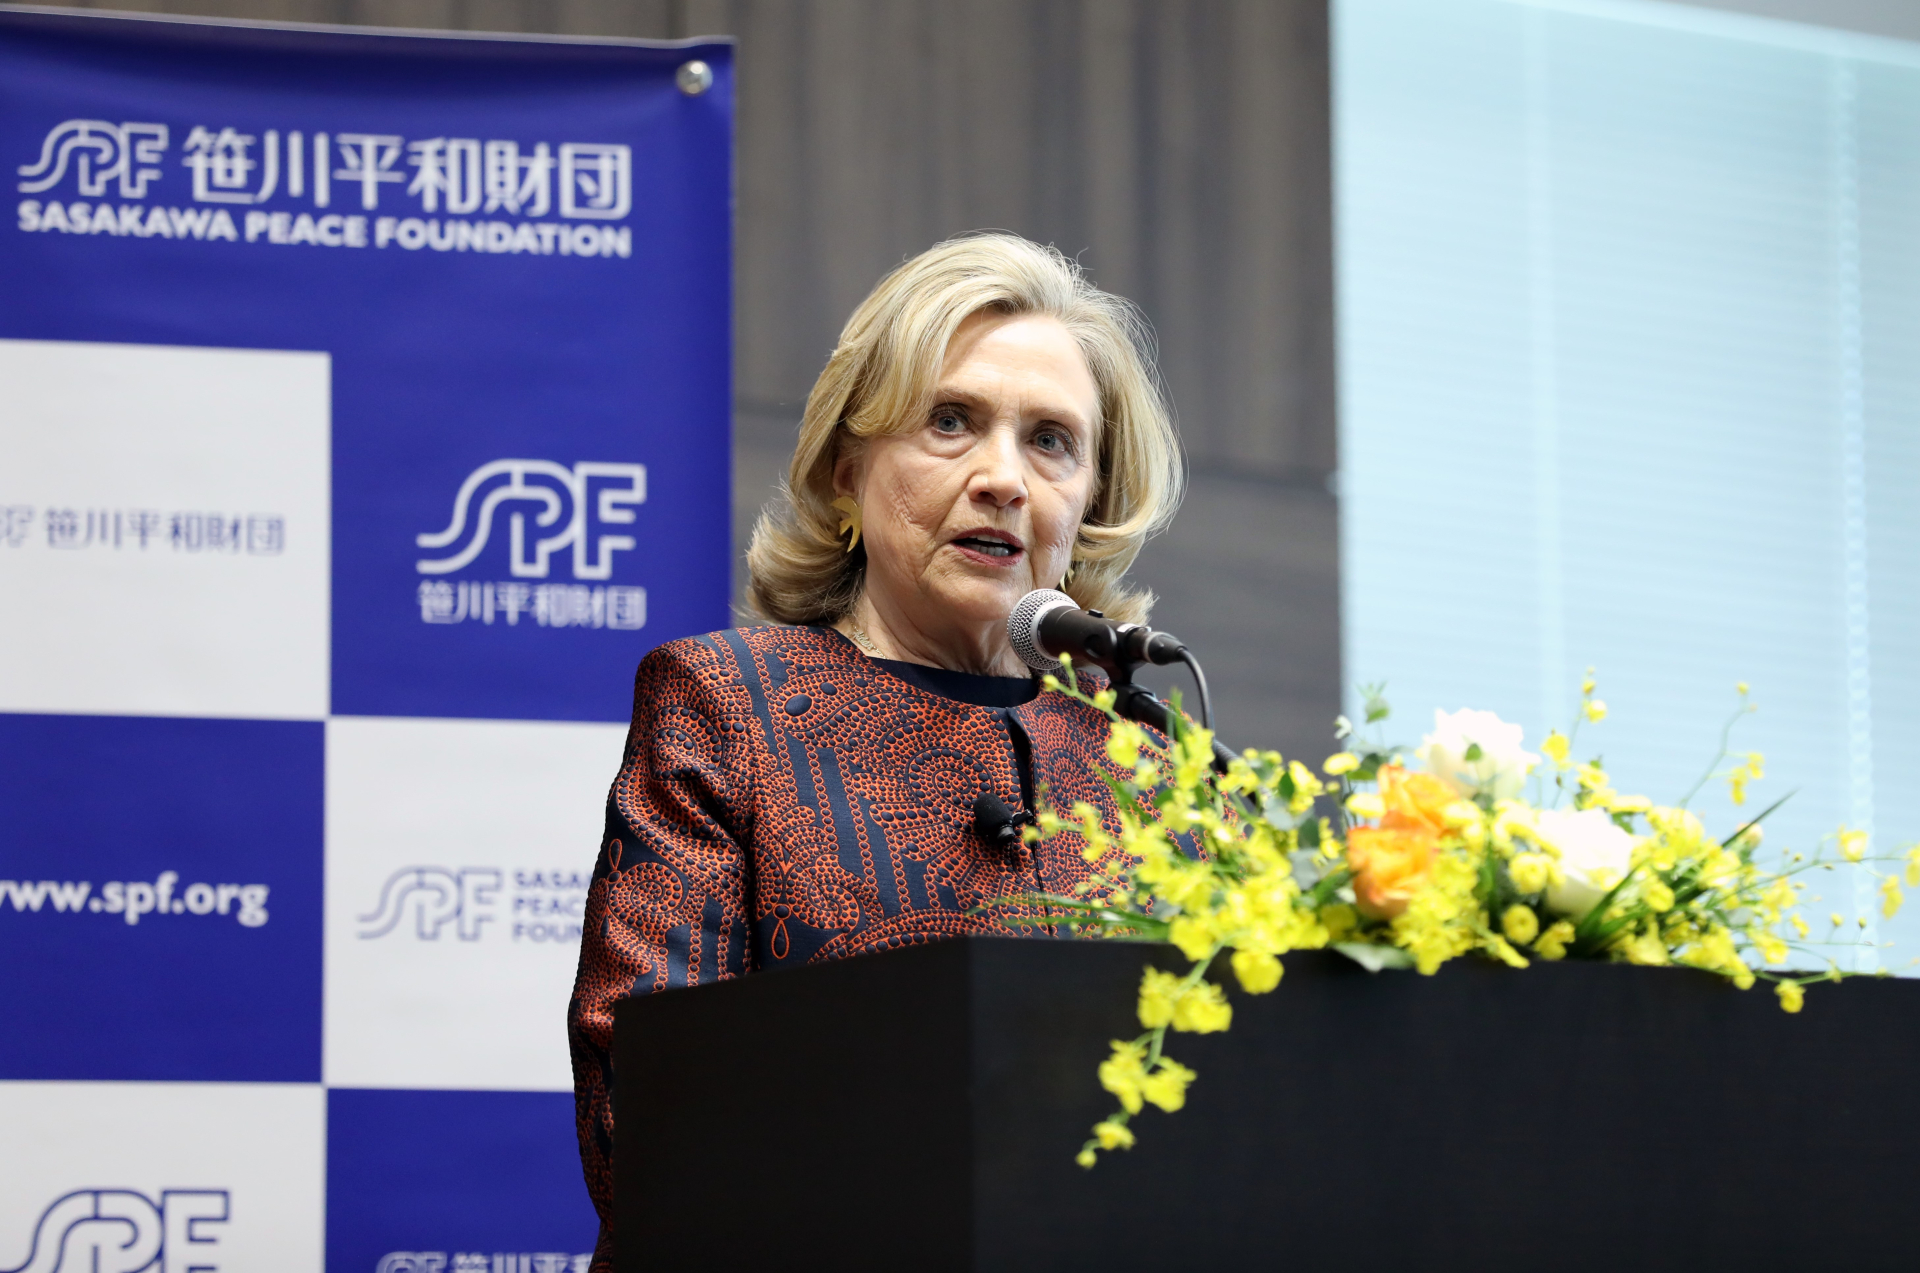 A Conversation with the Honorable Hillary Rodham Clinton